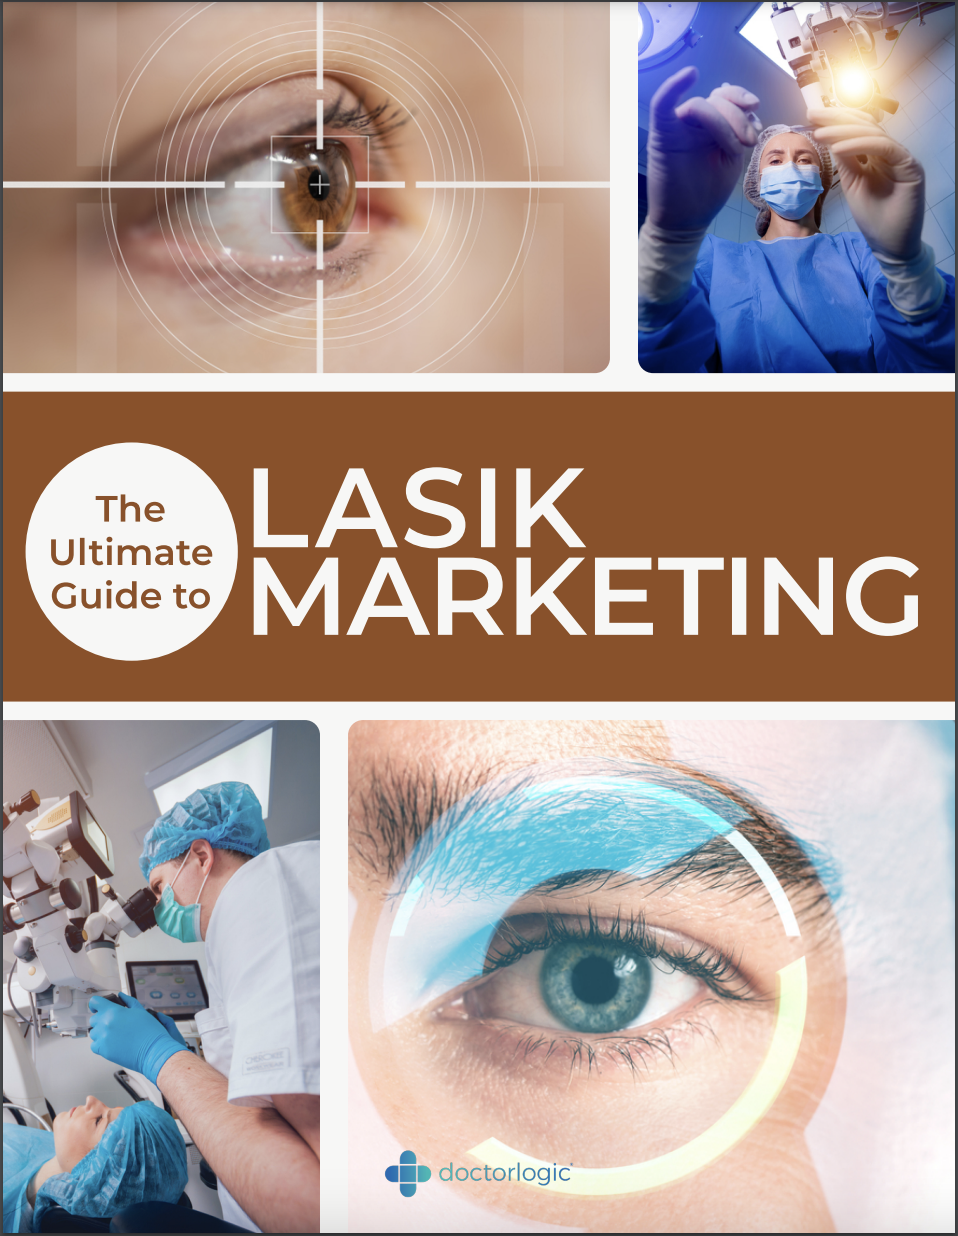 The Ultimate Guide to Lasik Marketing (Cover)